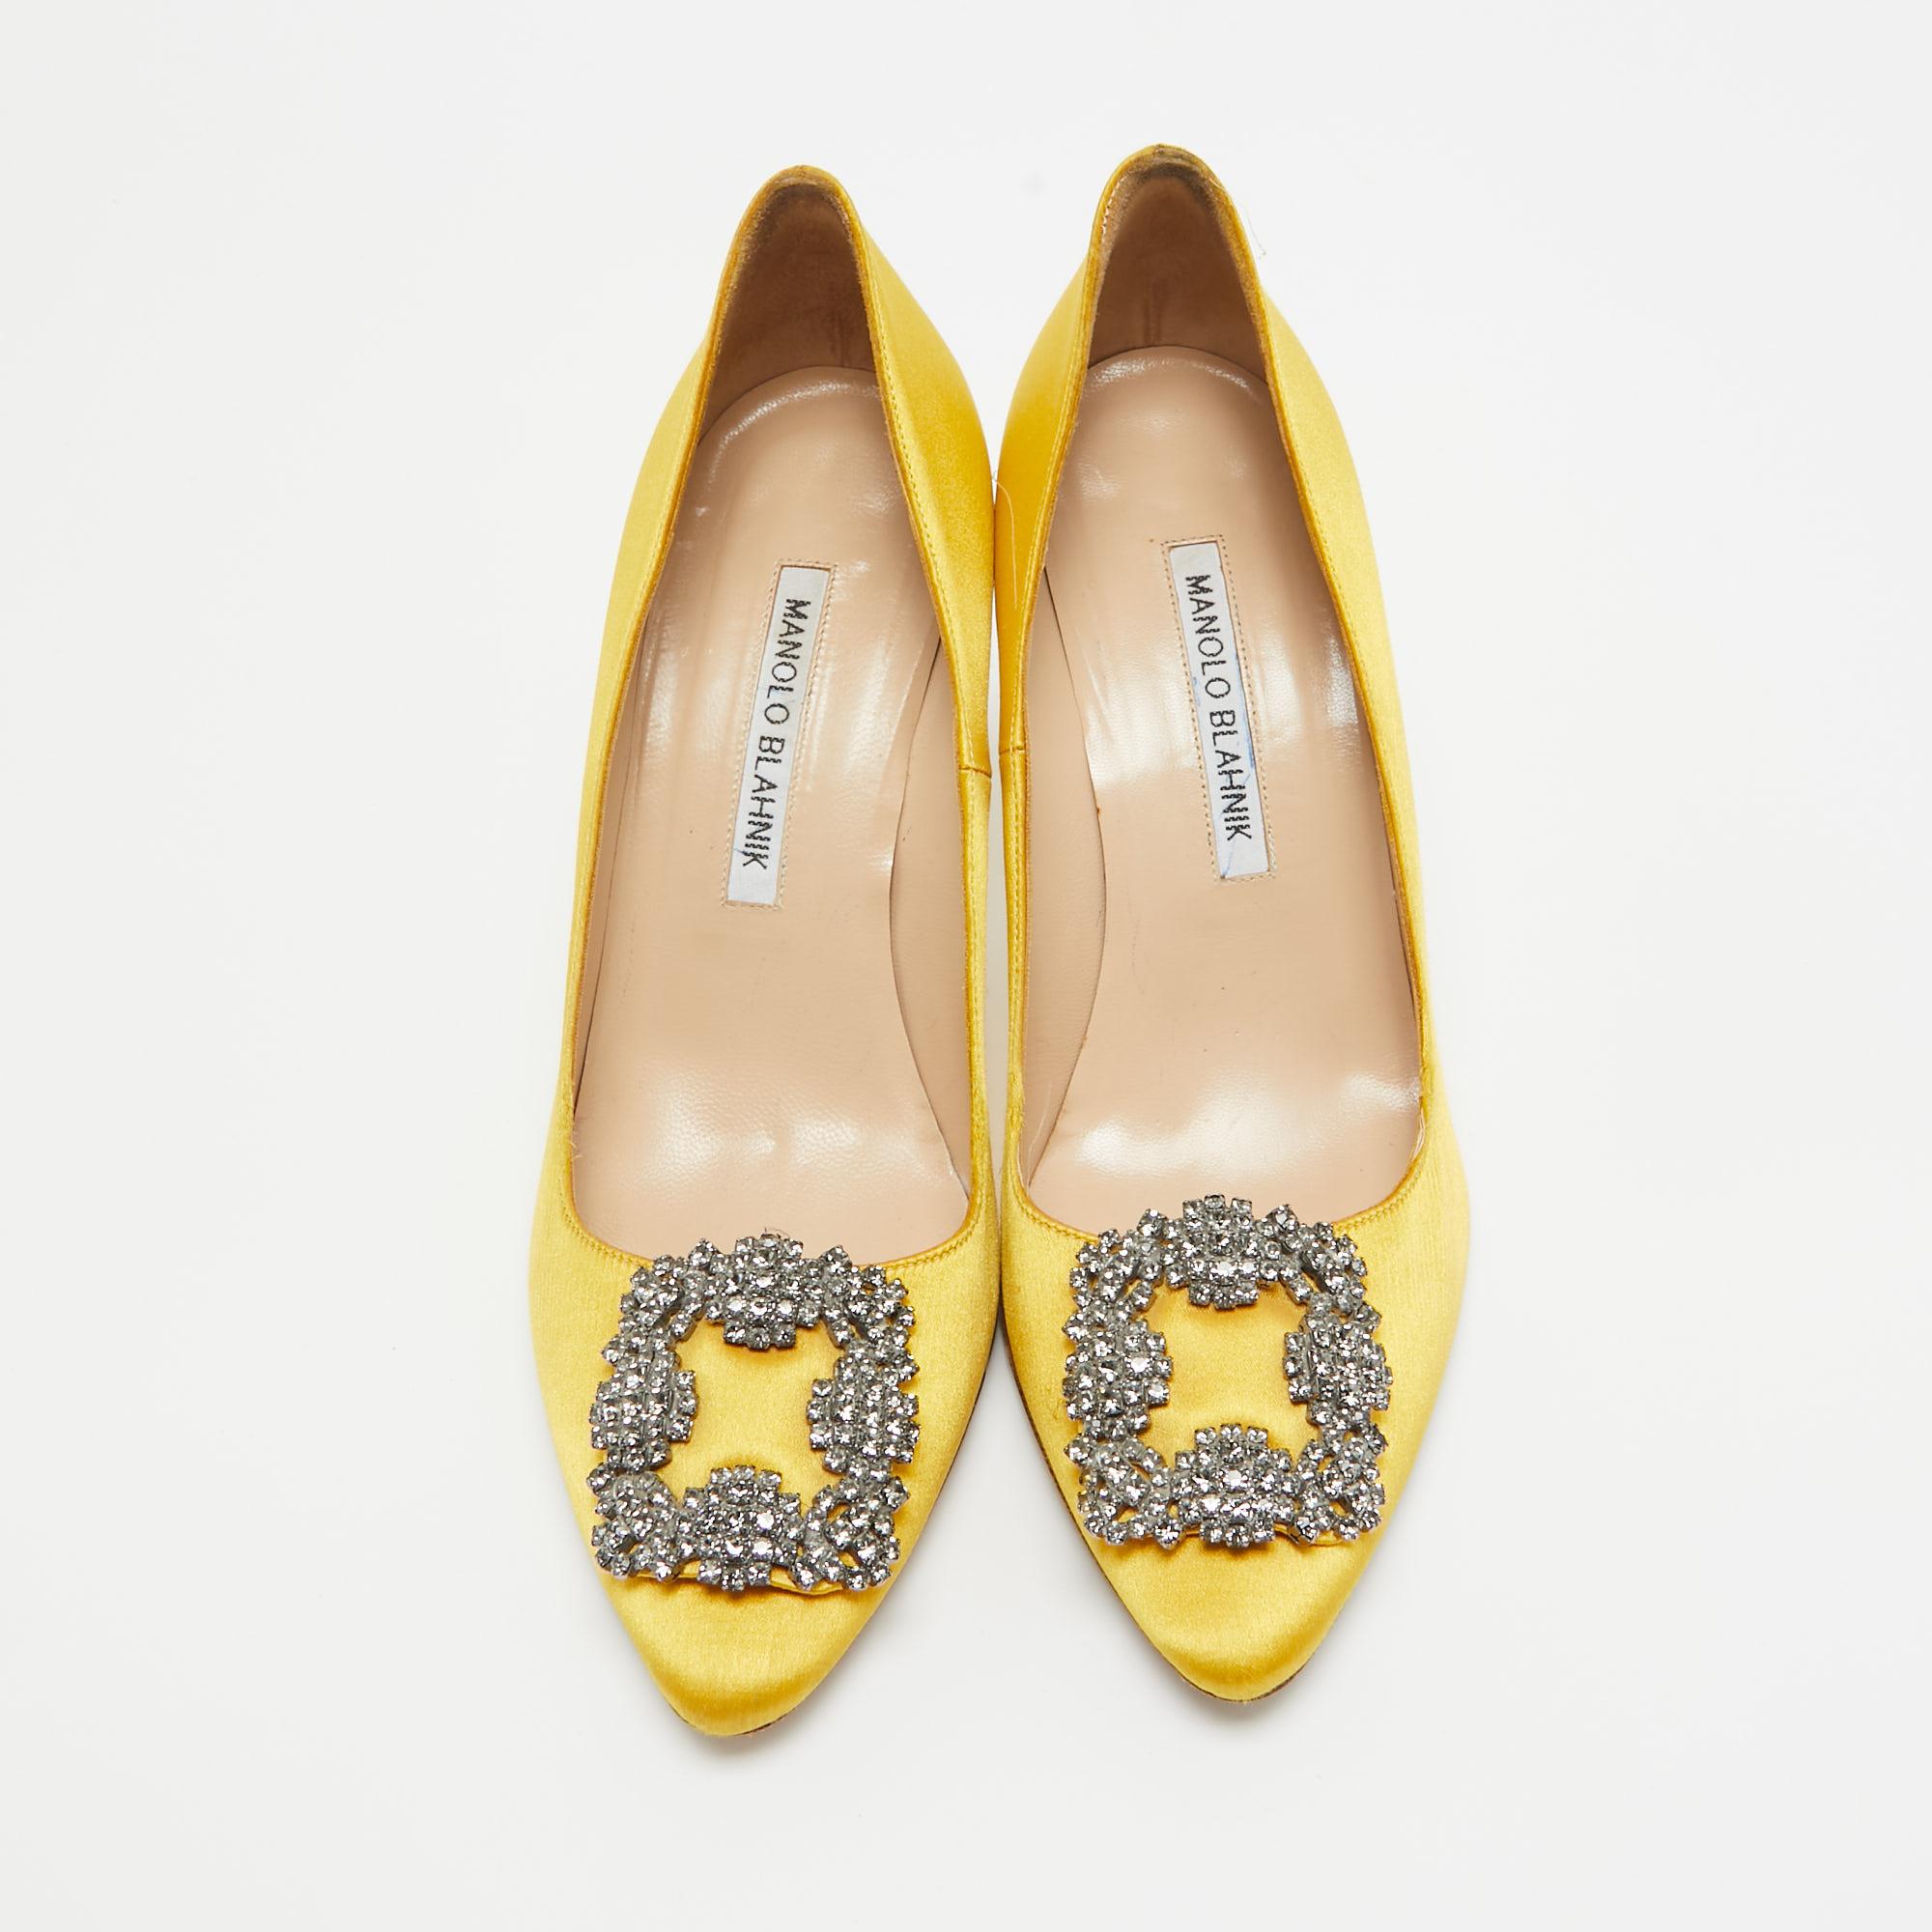 The 9cm heels of this pair of Manolo Blahnik pumps will reflect grace and luxury in every step. Made from satin, it is made striking with crystal-embellished buckle detailing on the toes and exhibits branded insoles.

